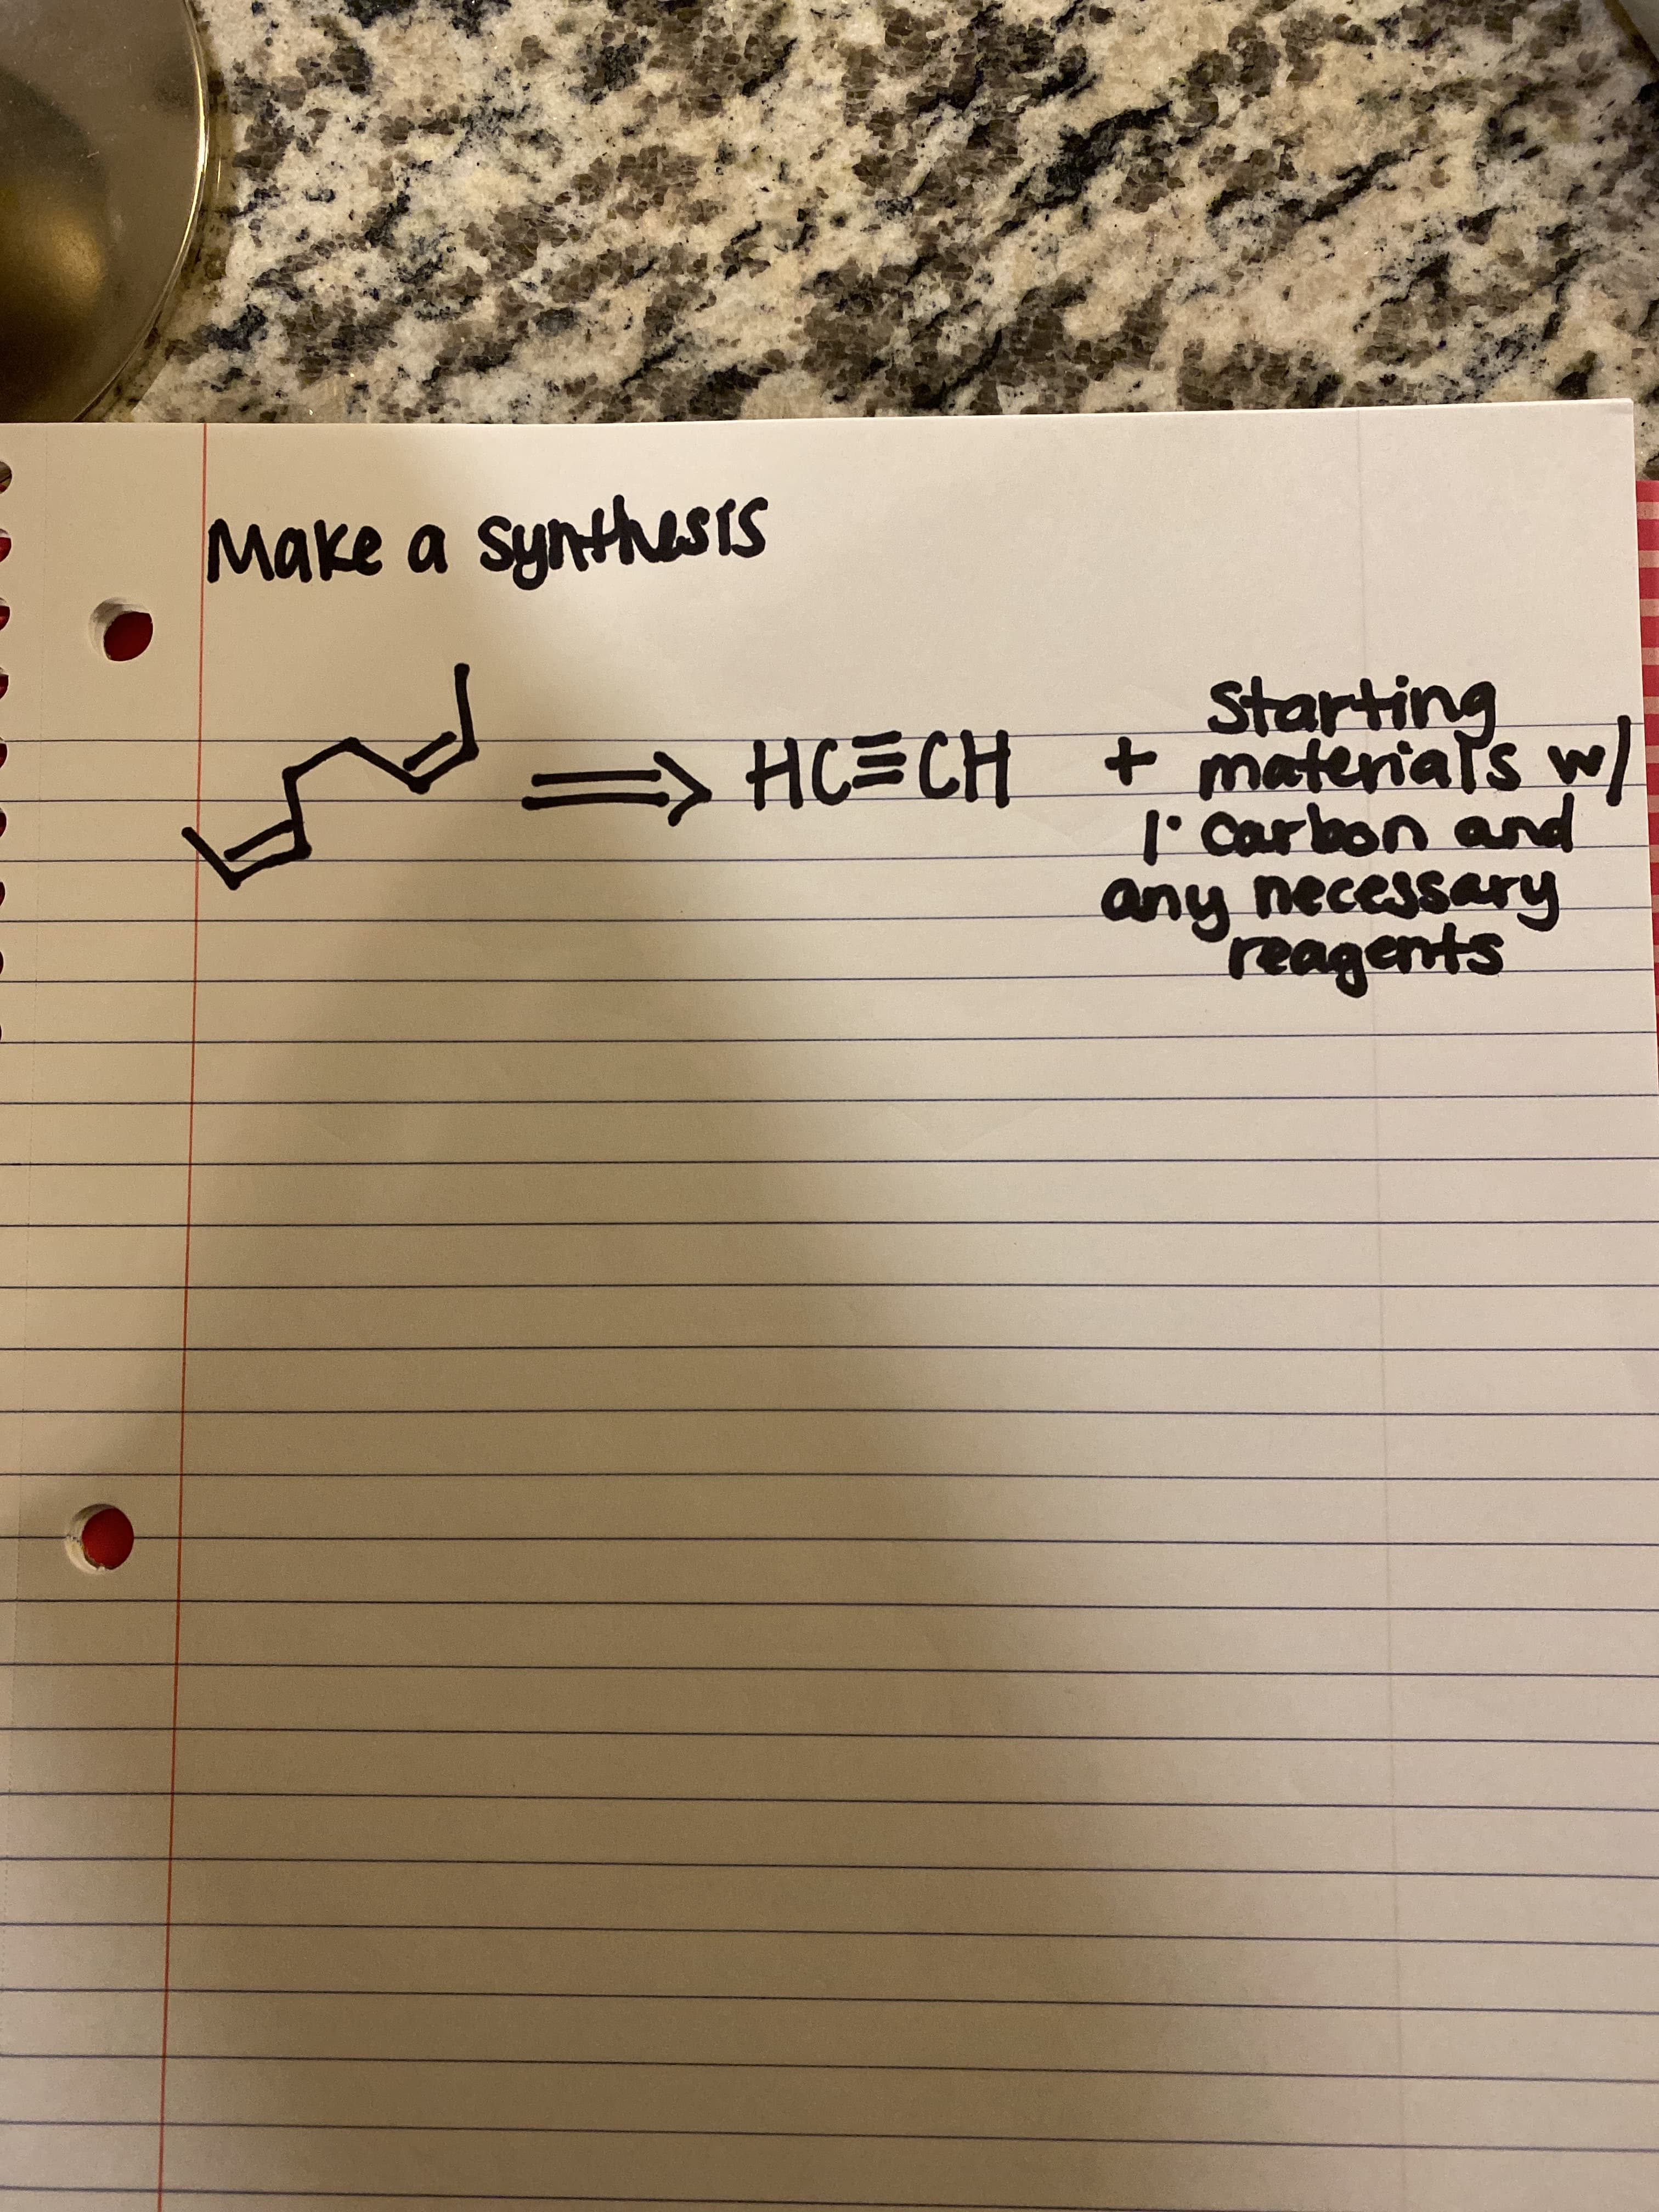 Make a SynthesiS
Starting
S HCECH + materials w
l'Carbon and
any necessary
reagents
